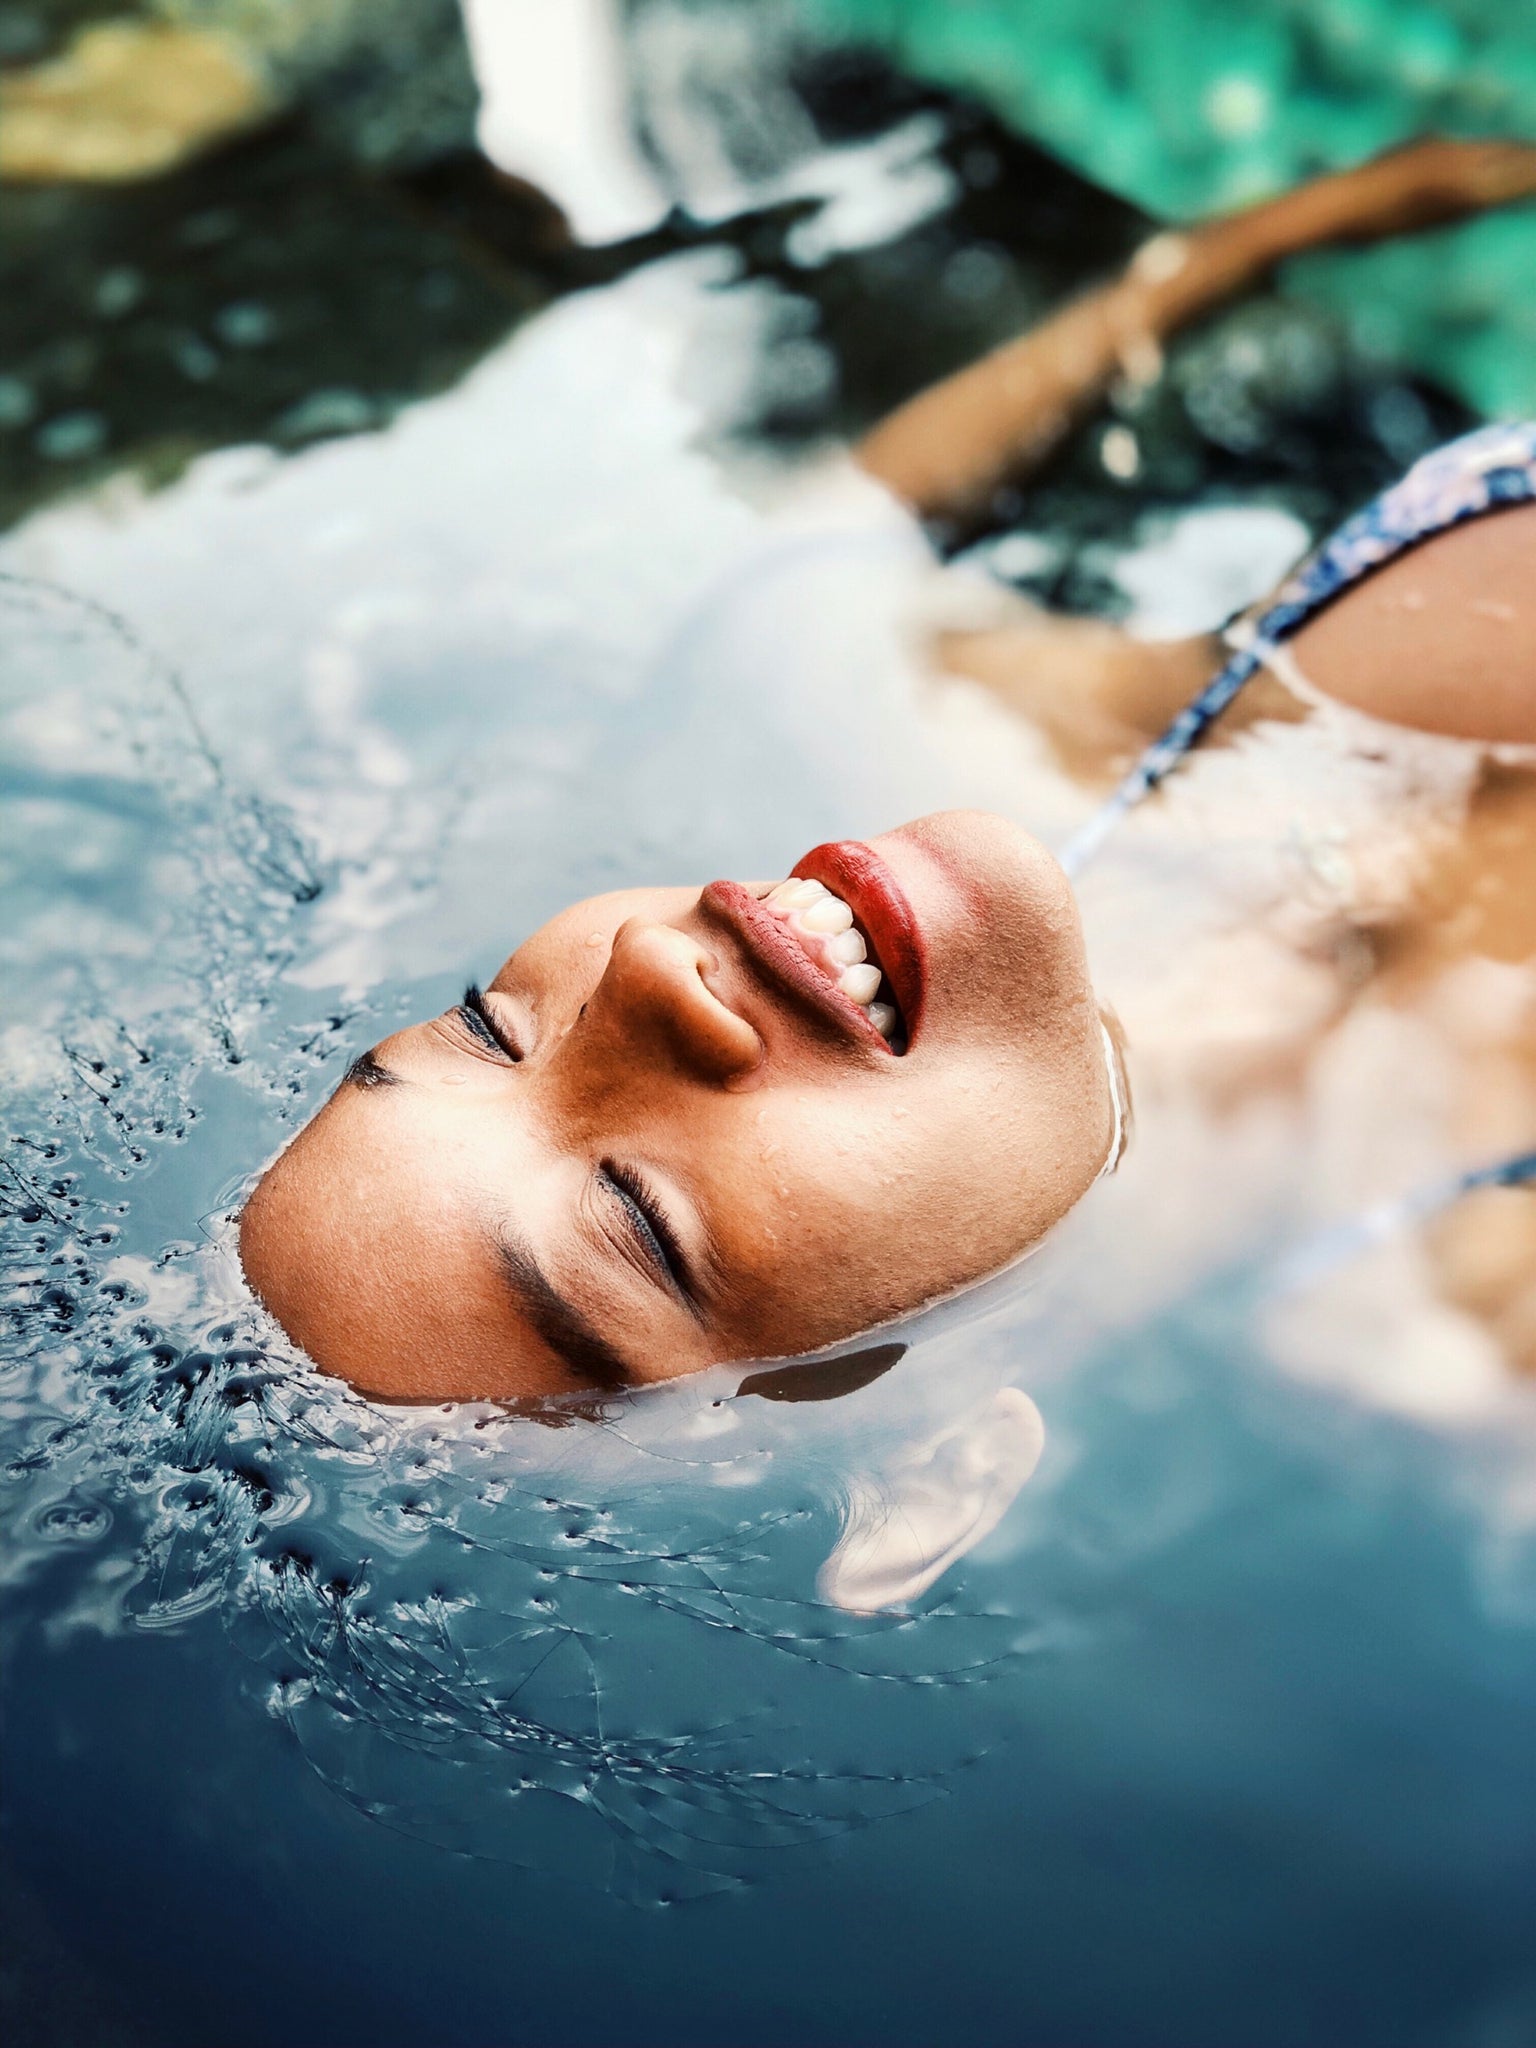 Beauty Myth: Drinking Water will Hydrate your skin